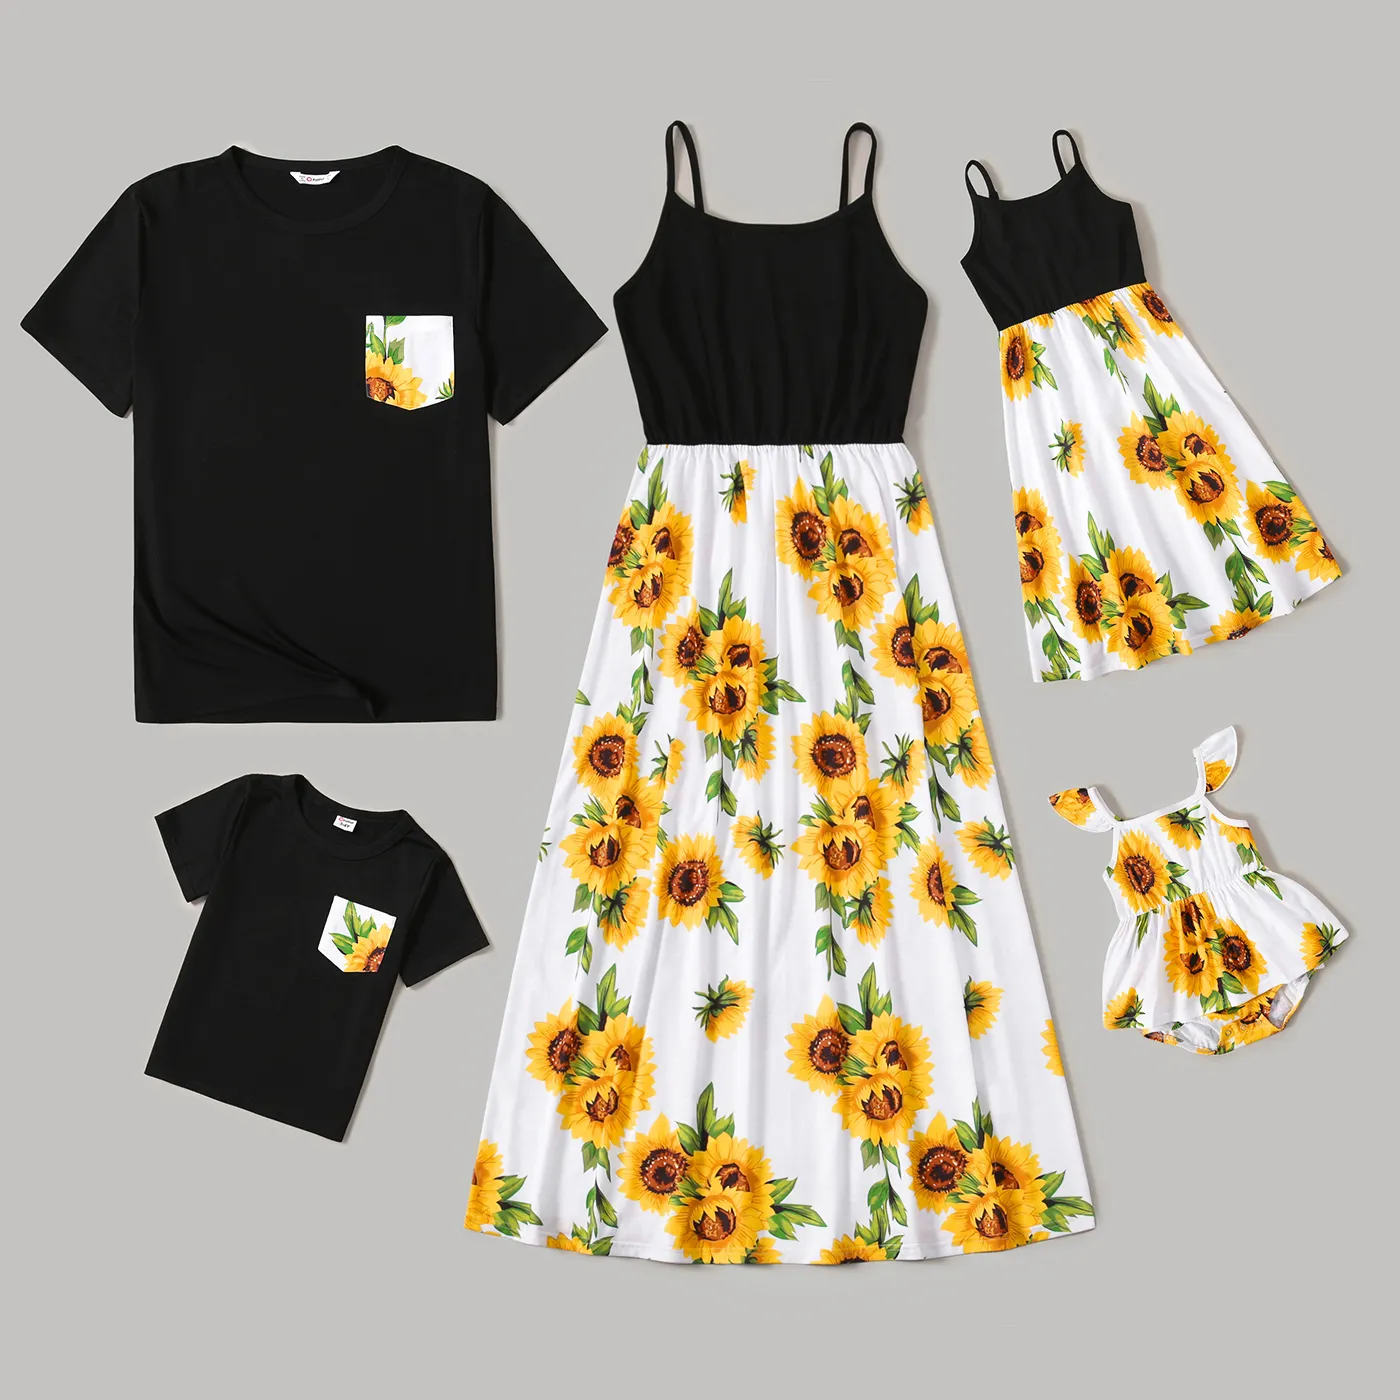 Sunflower Series Black Family Matching Sets(Sling Dresses for Mom and Girl - Short Sleeve T-shirts for Dad and Boy)